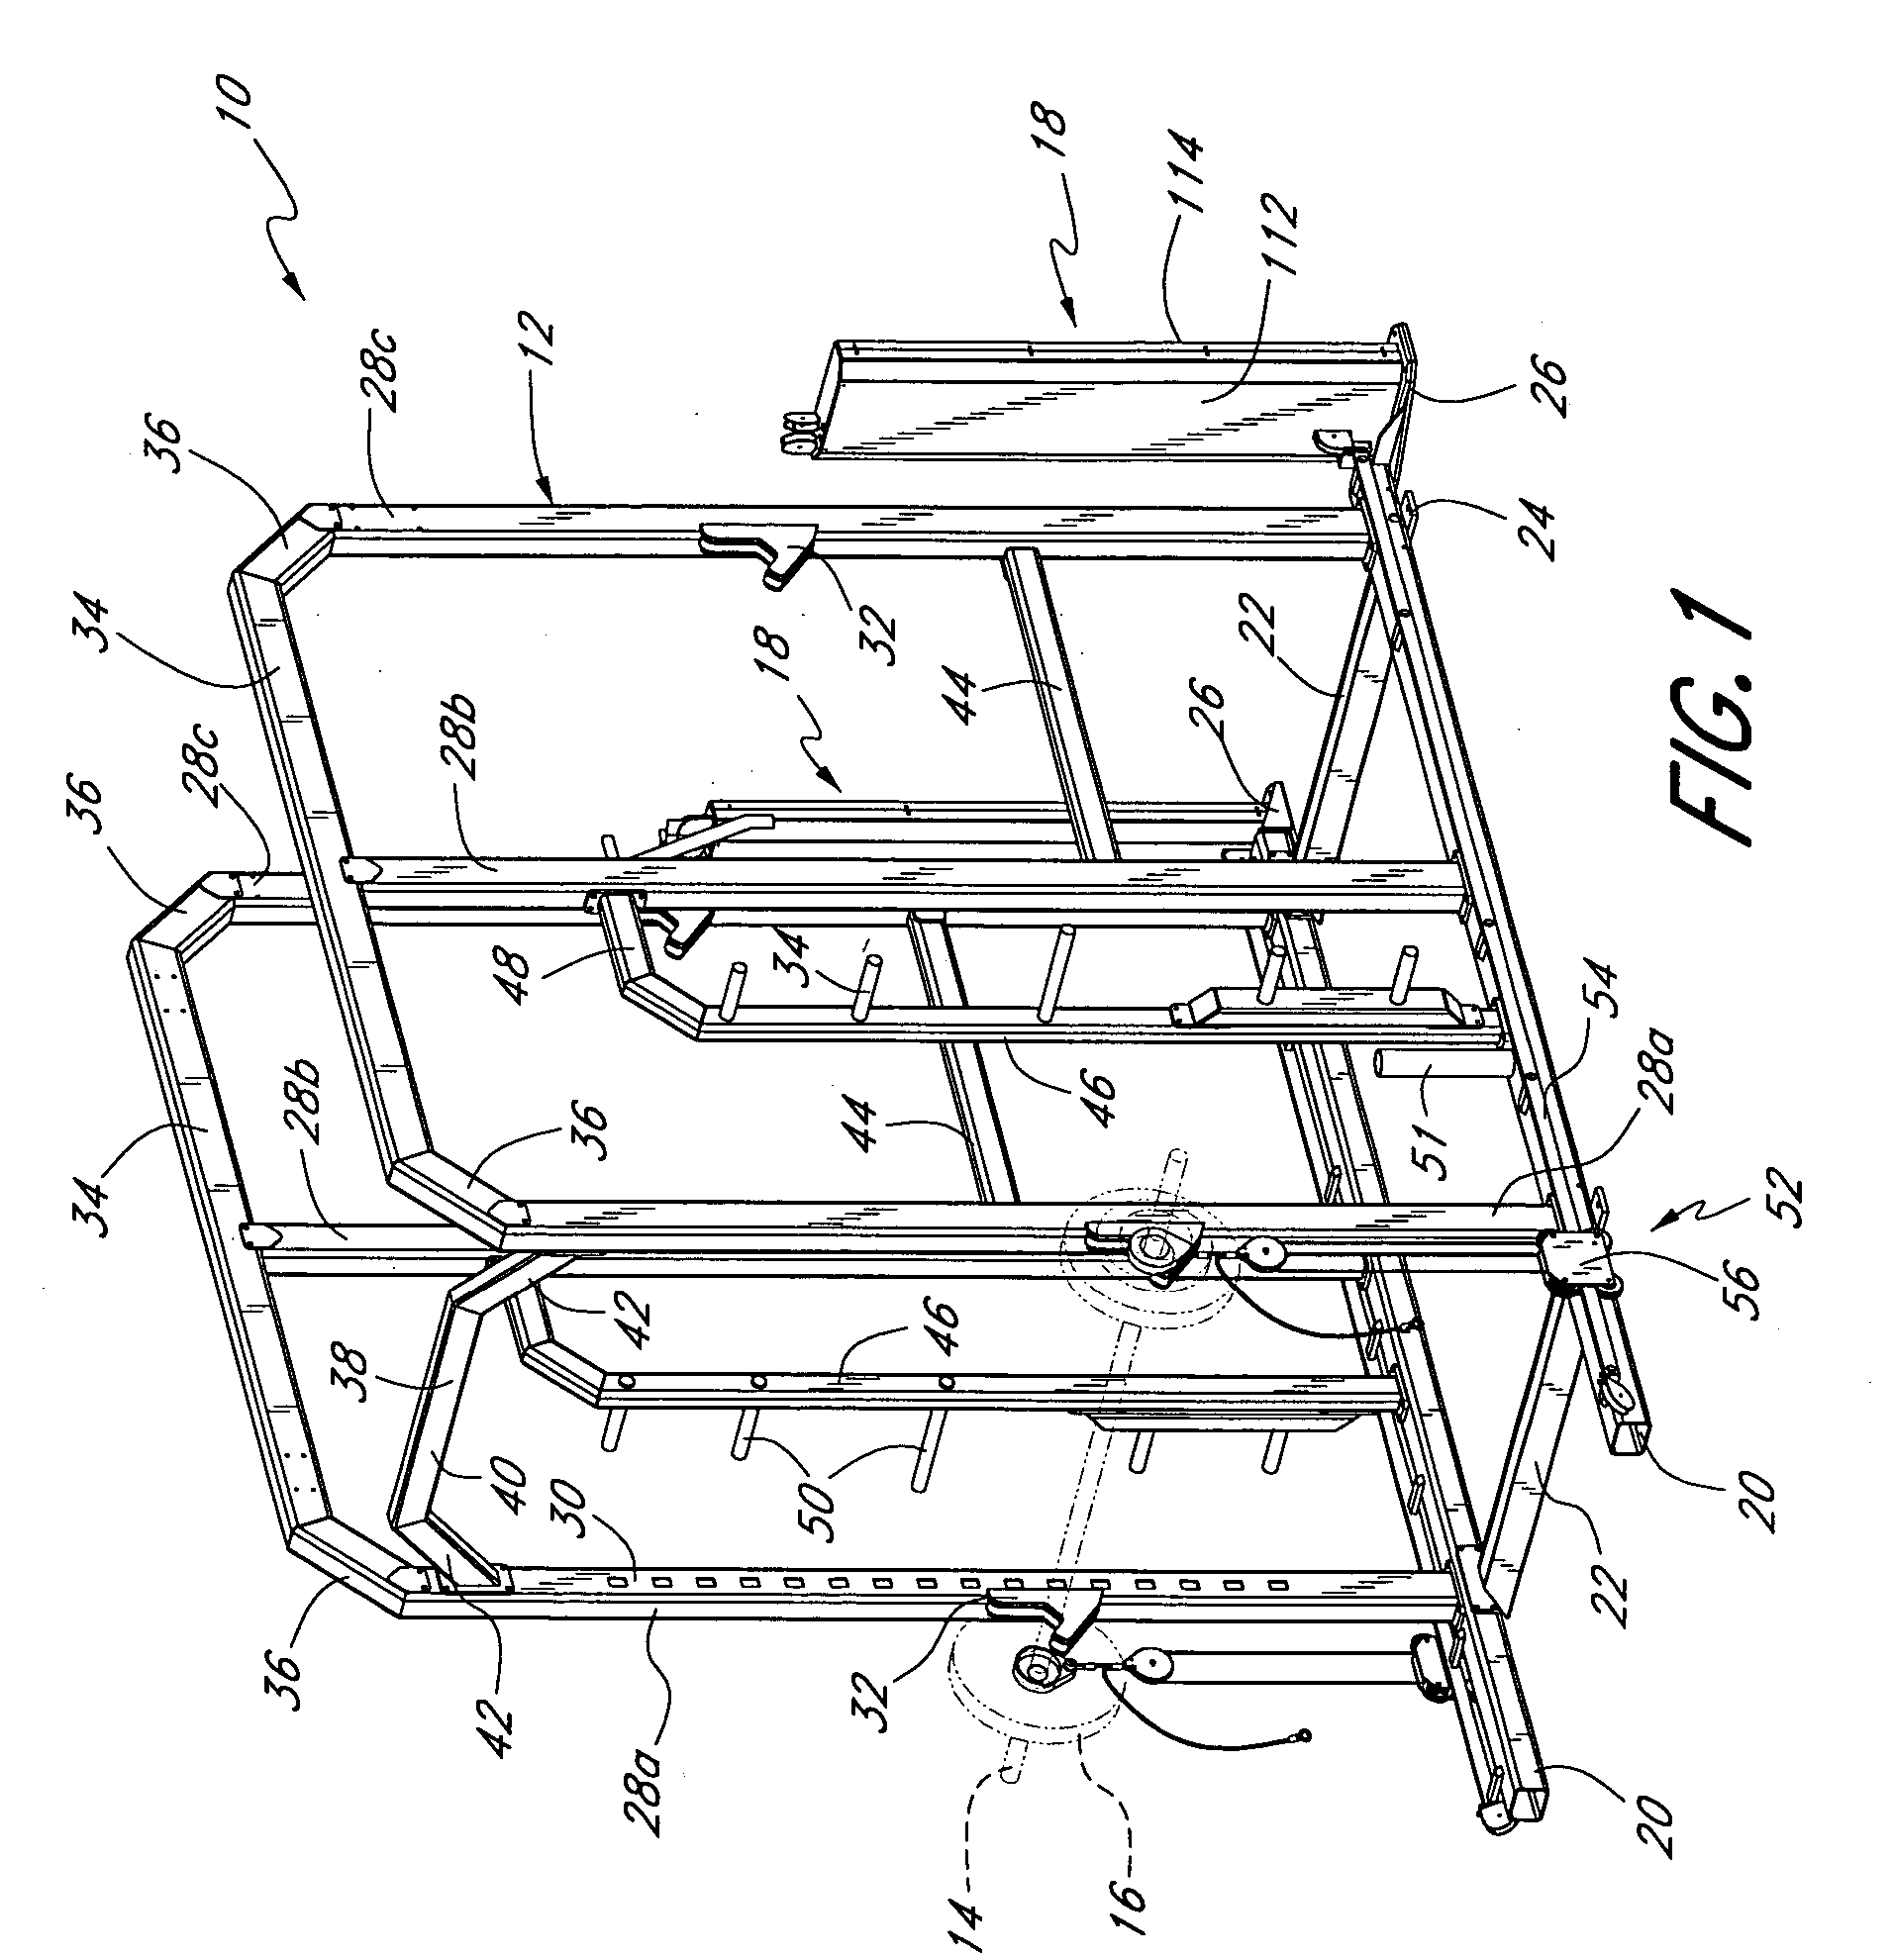 Exercise apparatus using weight and pneumatic resistances